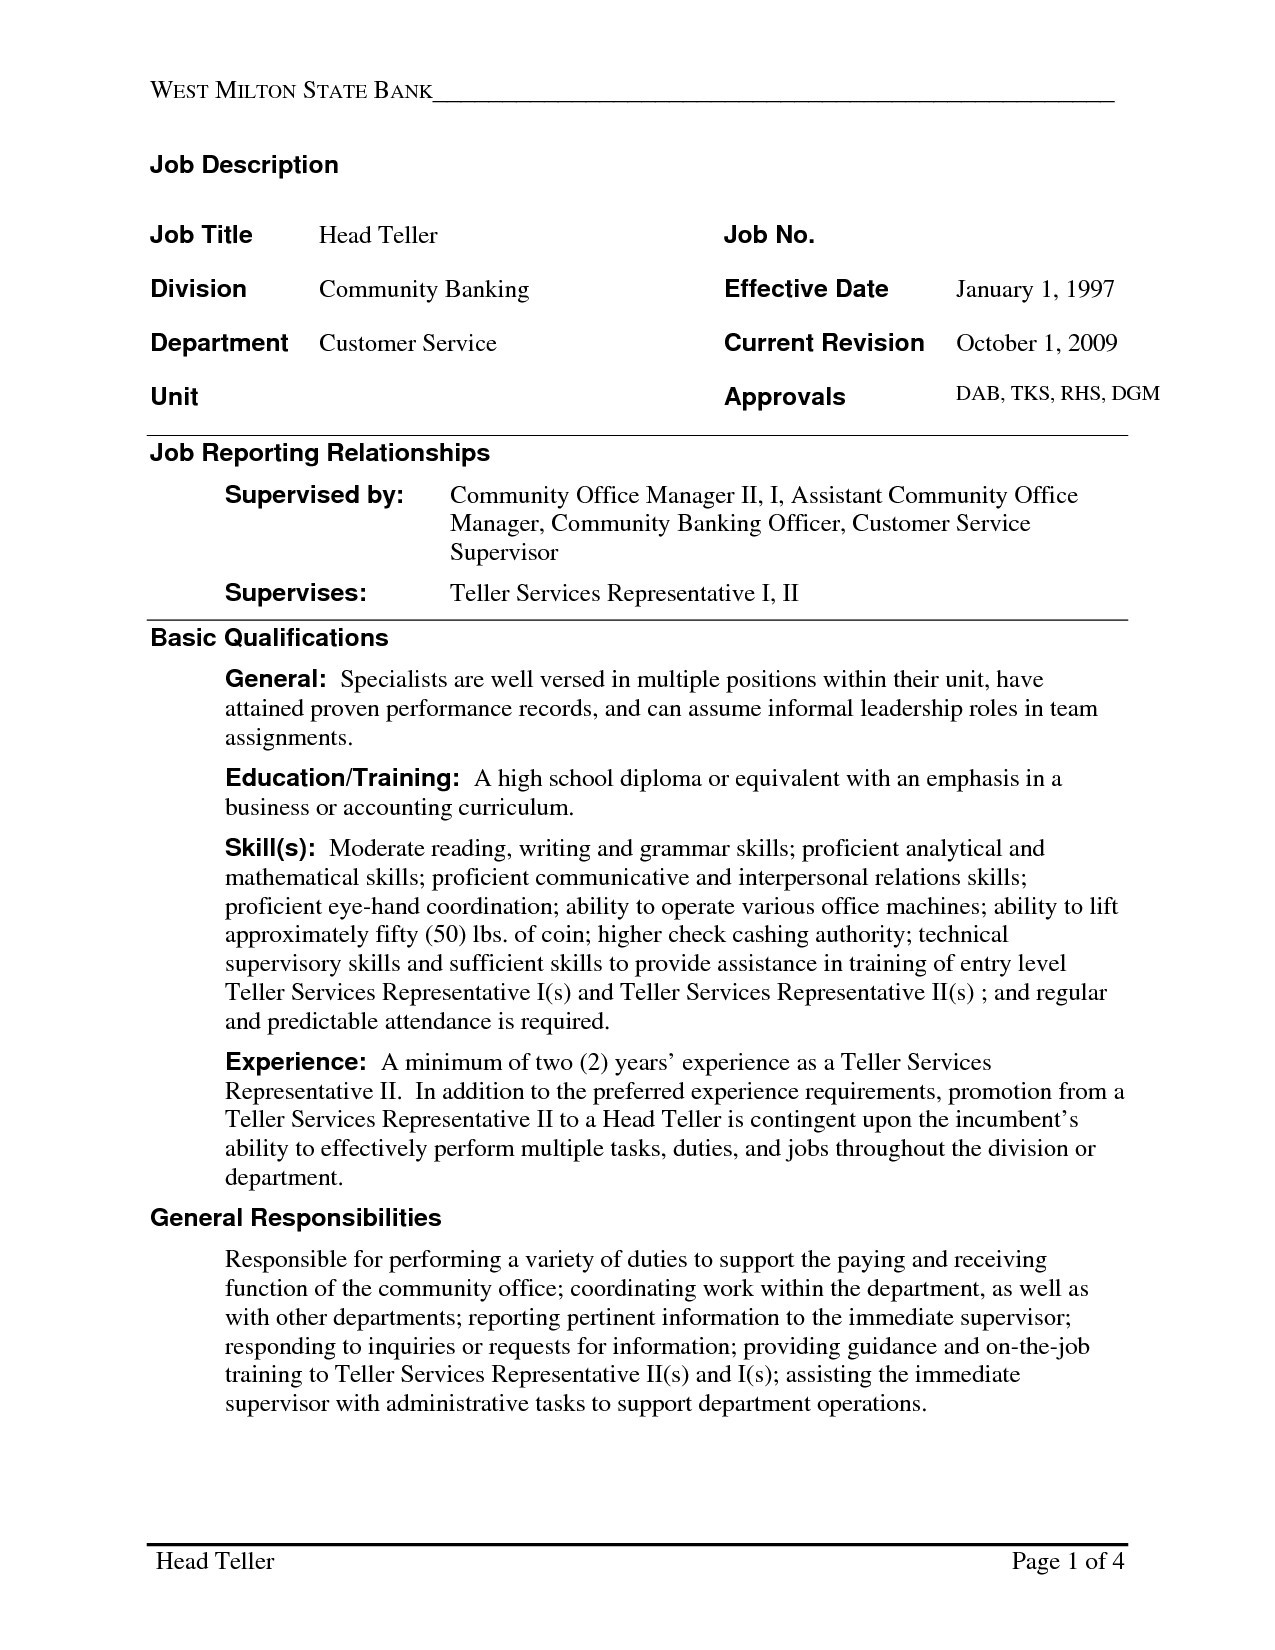 resume samples for bank teller with no experience new resume samples